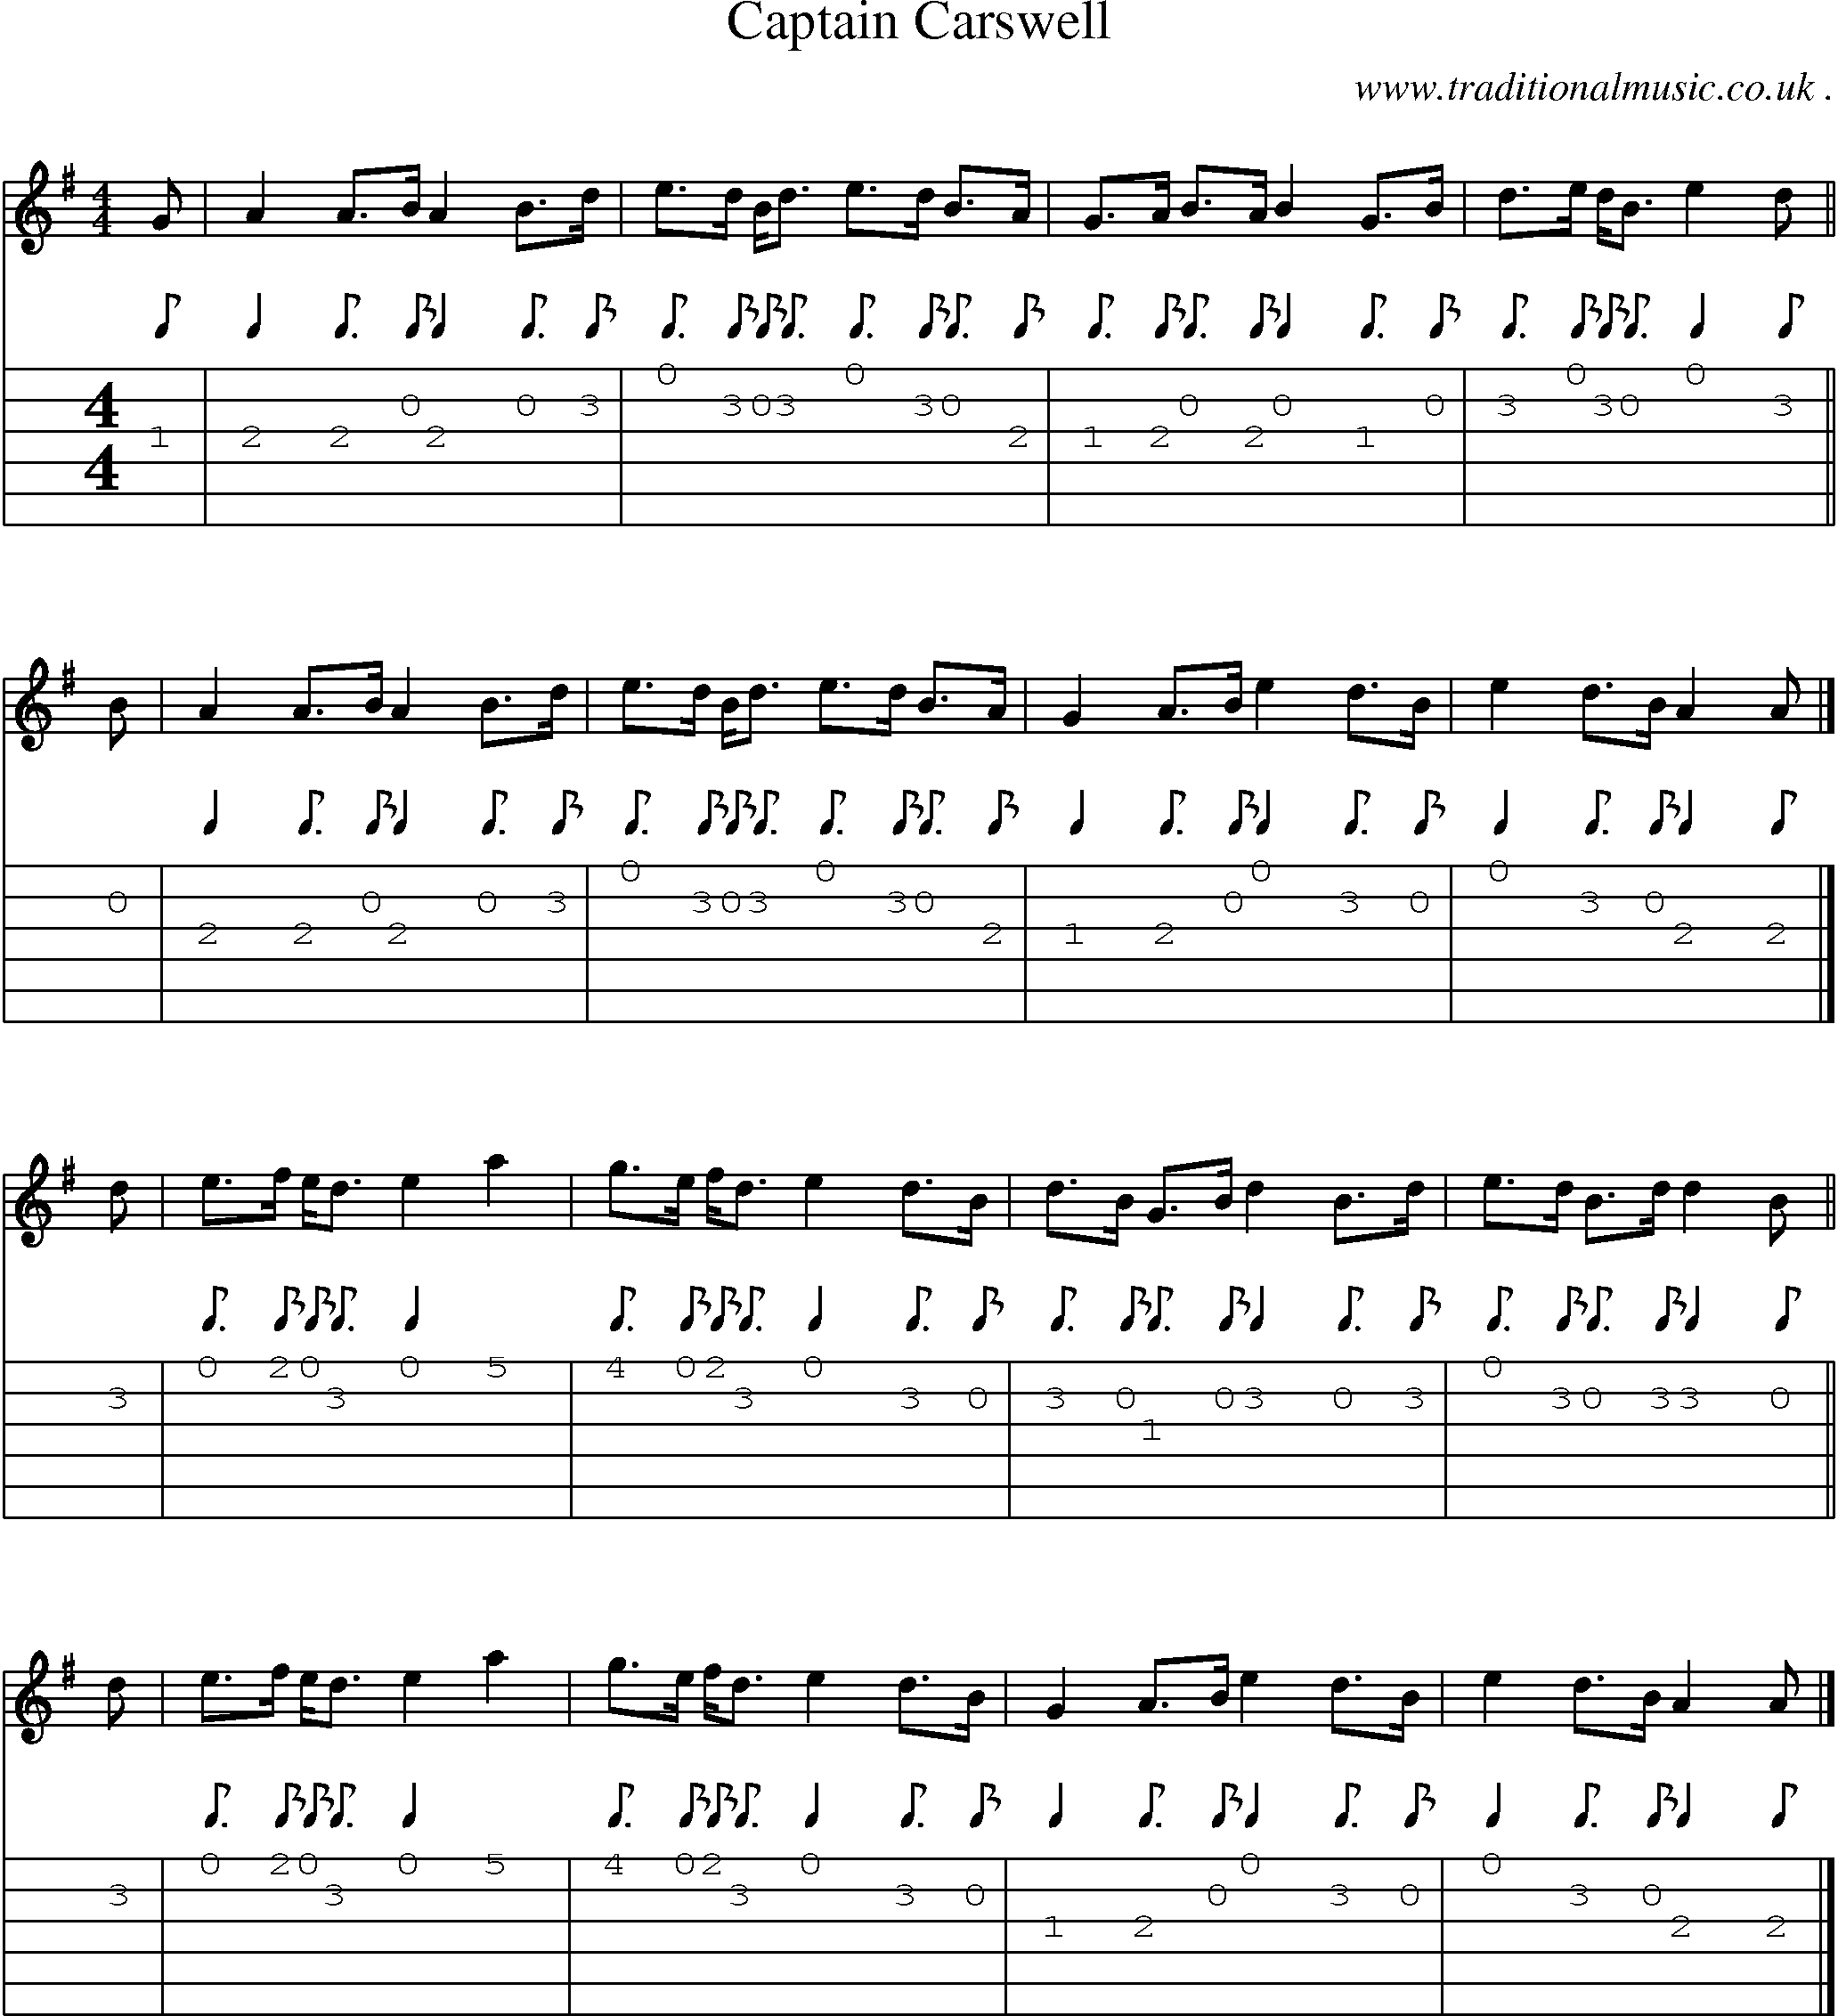 Sheet-music  score, Chords and Guitar Tabs for Captain Carswell